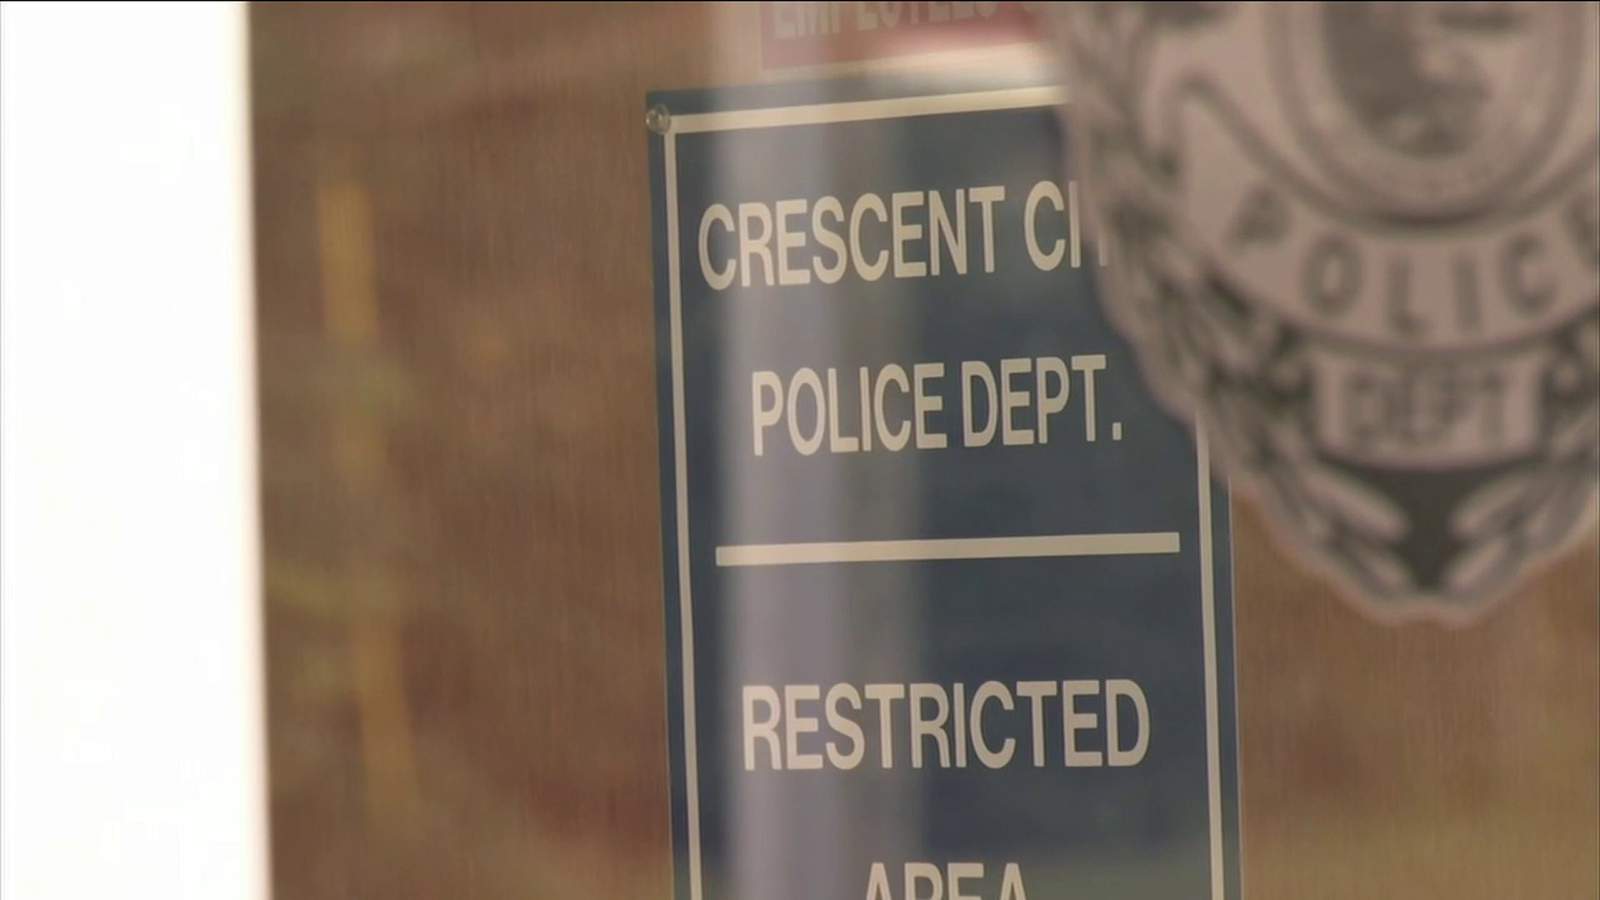 Putnam County Sheriff’s Office proposes takeover of Crescent City law enforcement